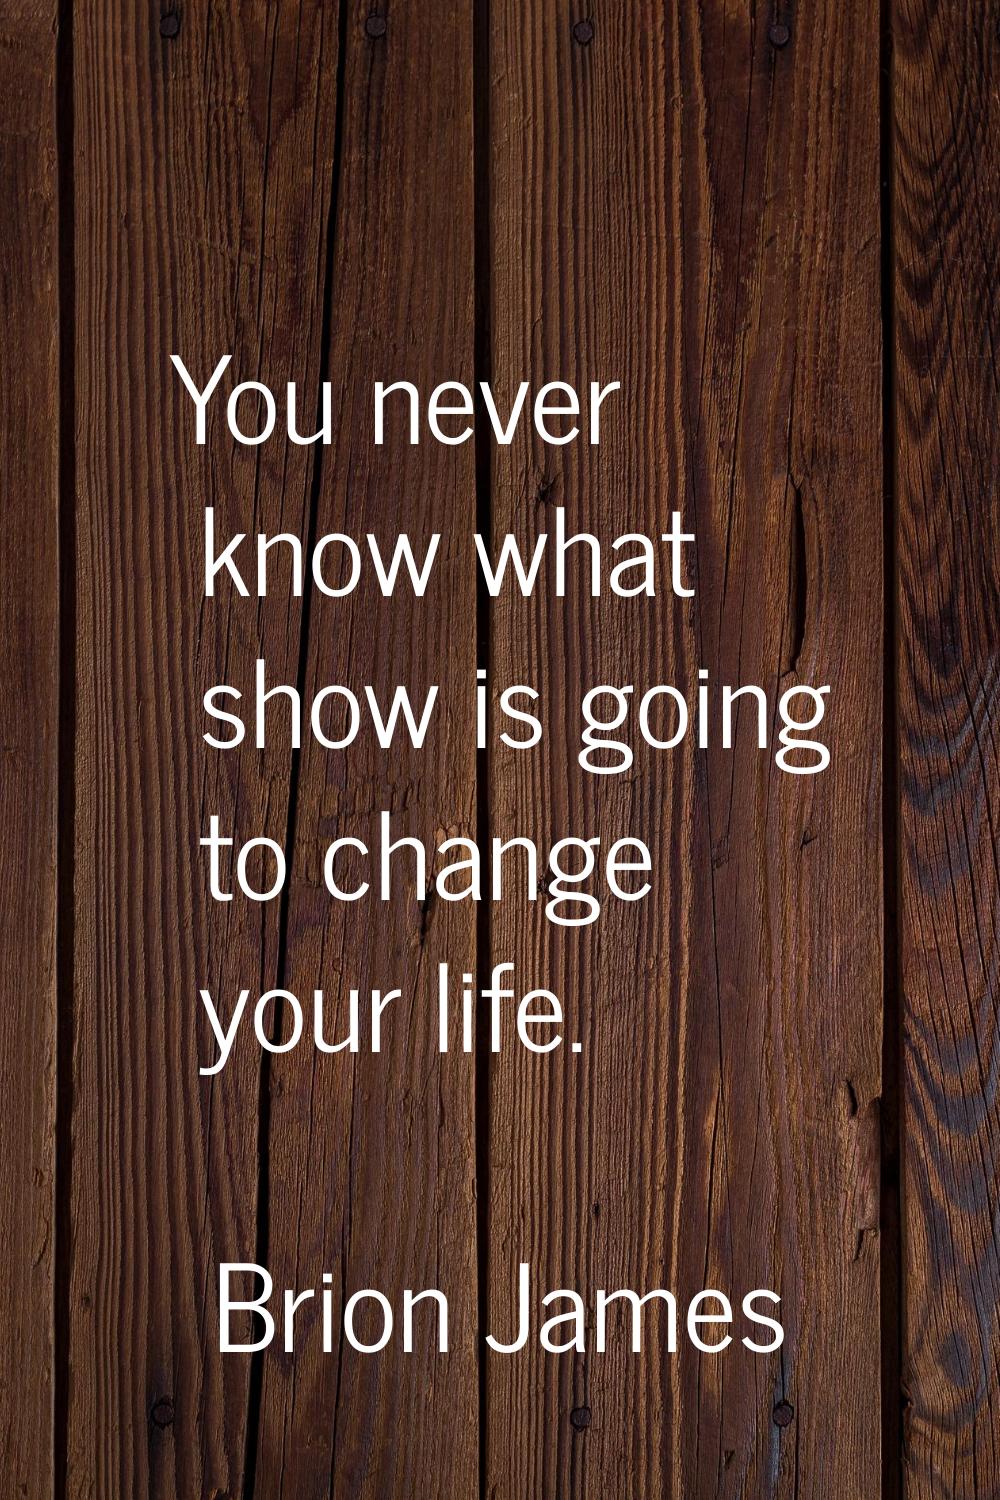 You never know what show is going to change your life.